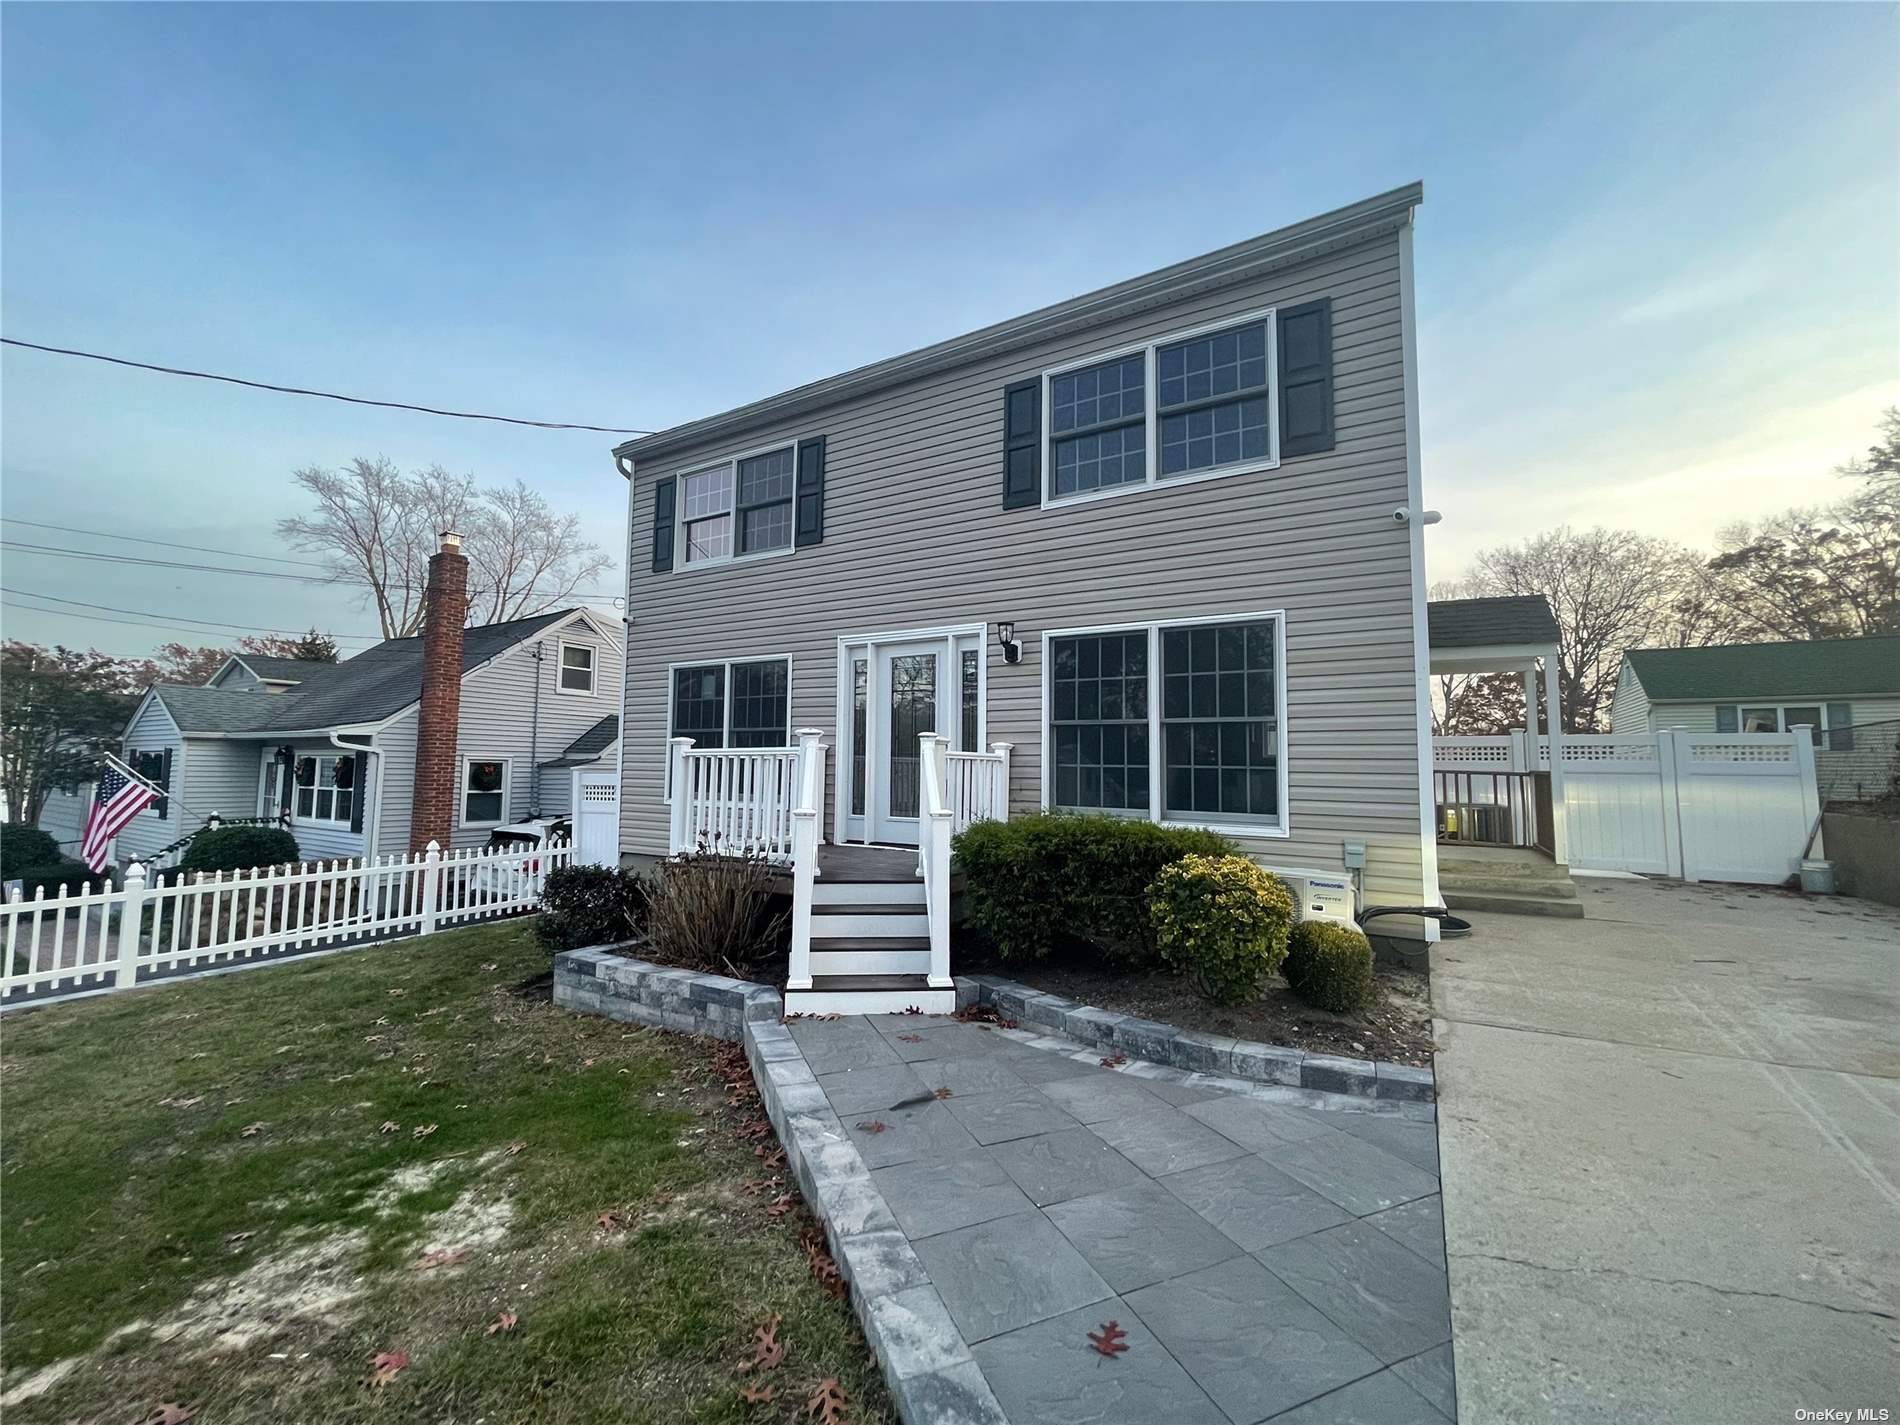 Awesome Colonial style house rental with 4 bedrooms plus 2 full bathrooms and partial basement with laundry room and storage !